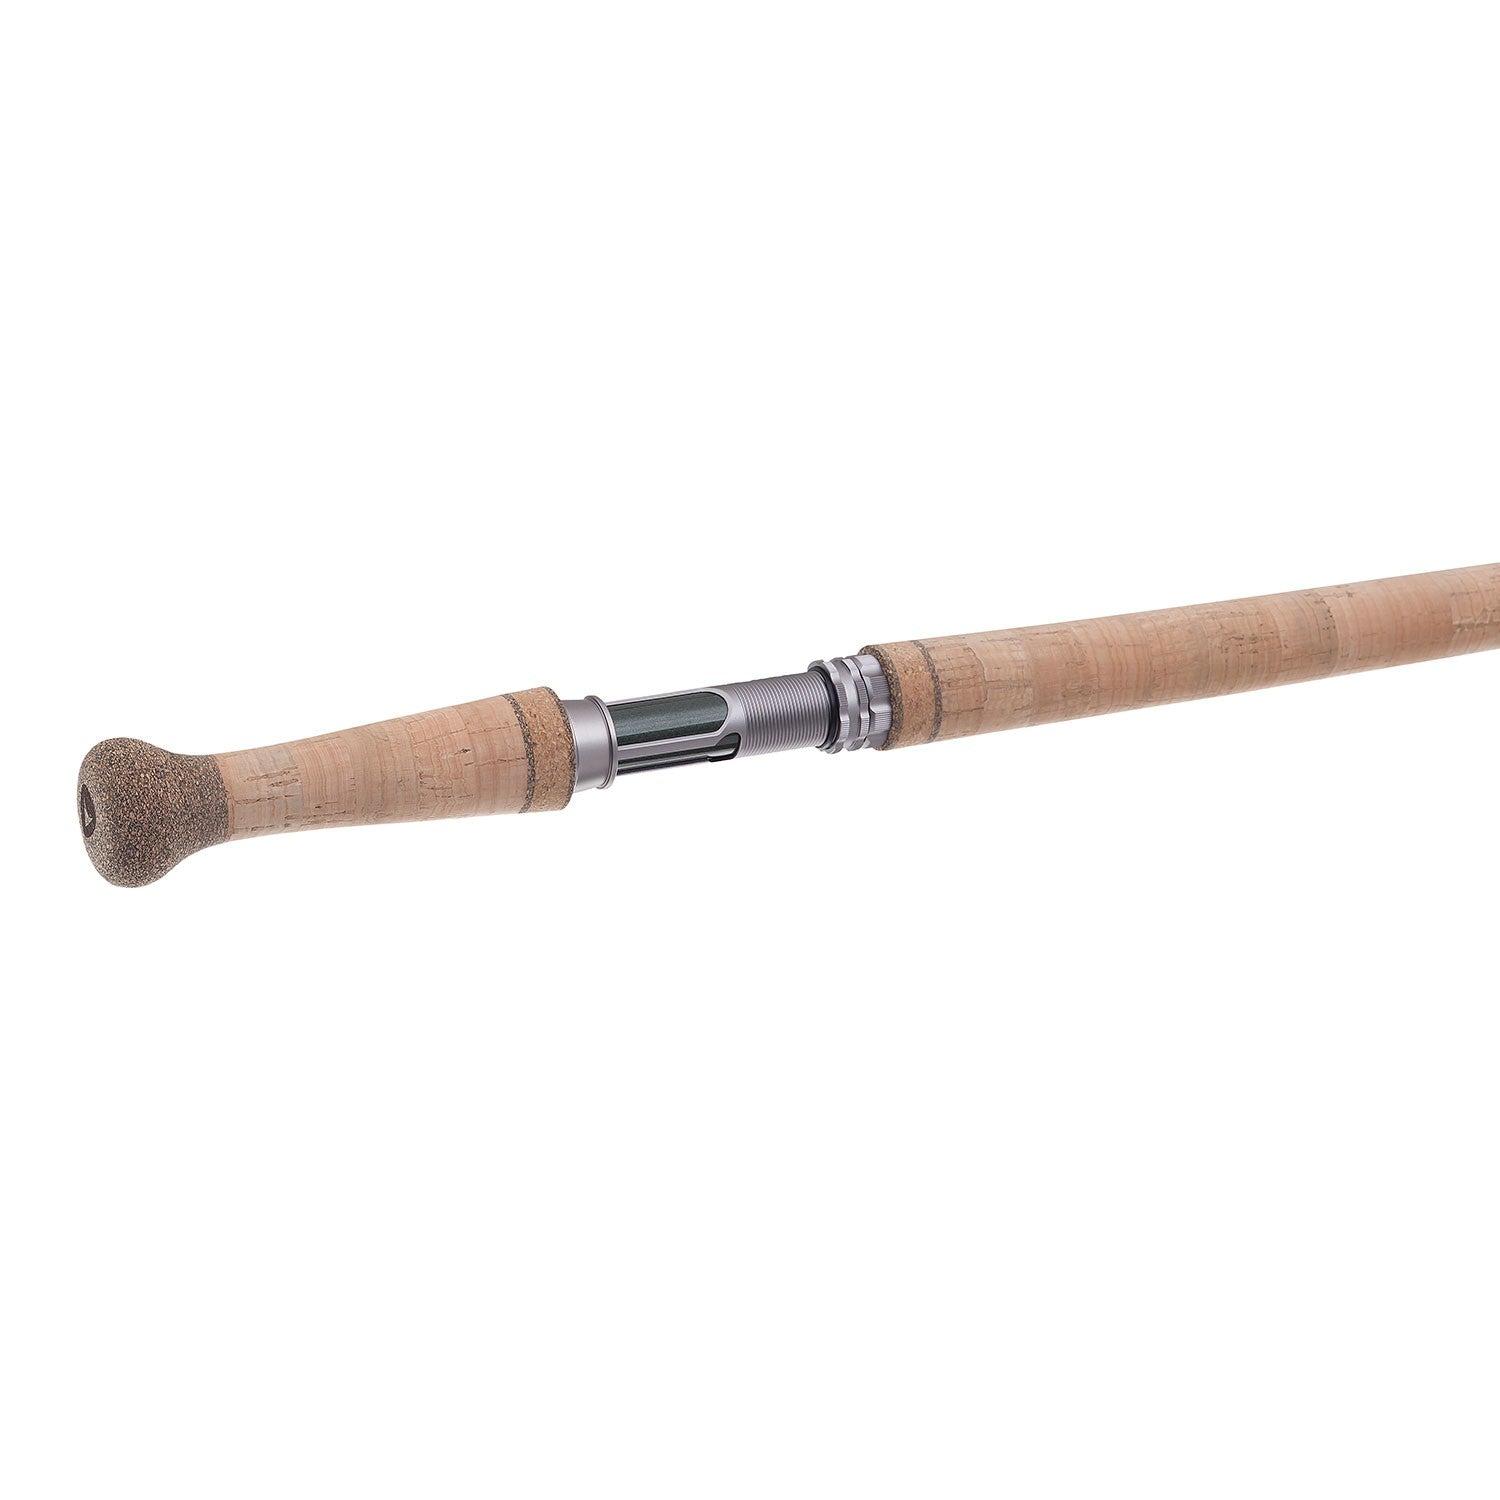 Fly Rods – Anglers World